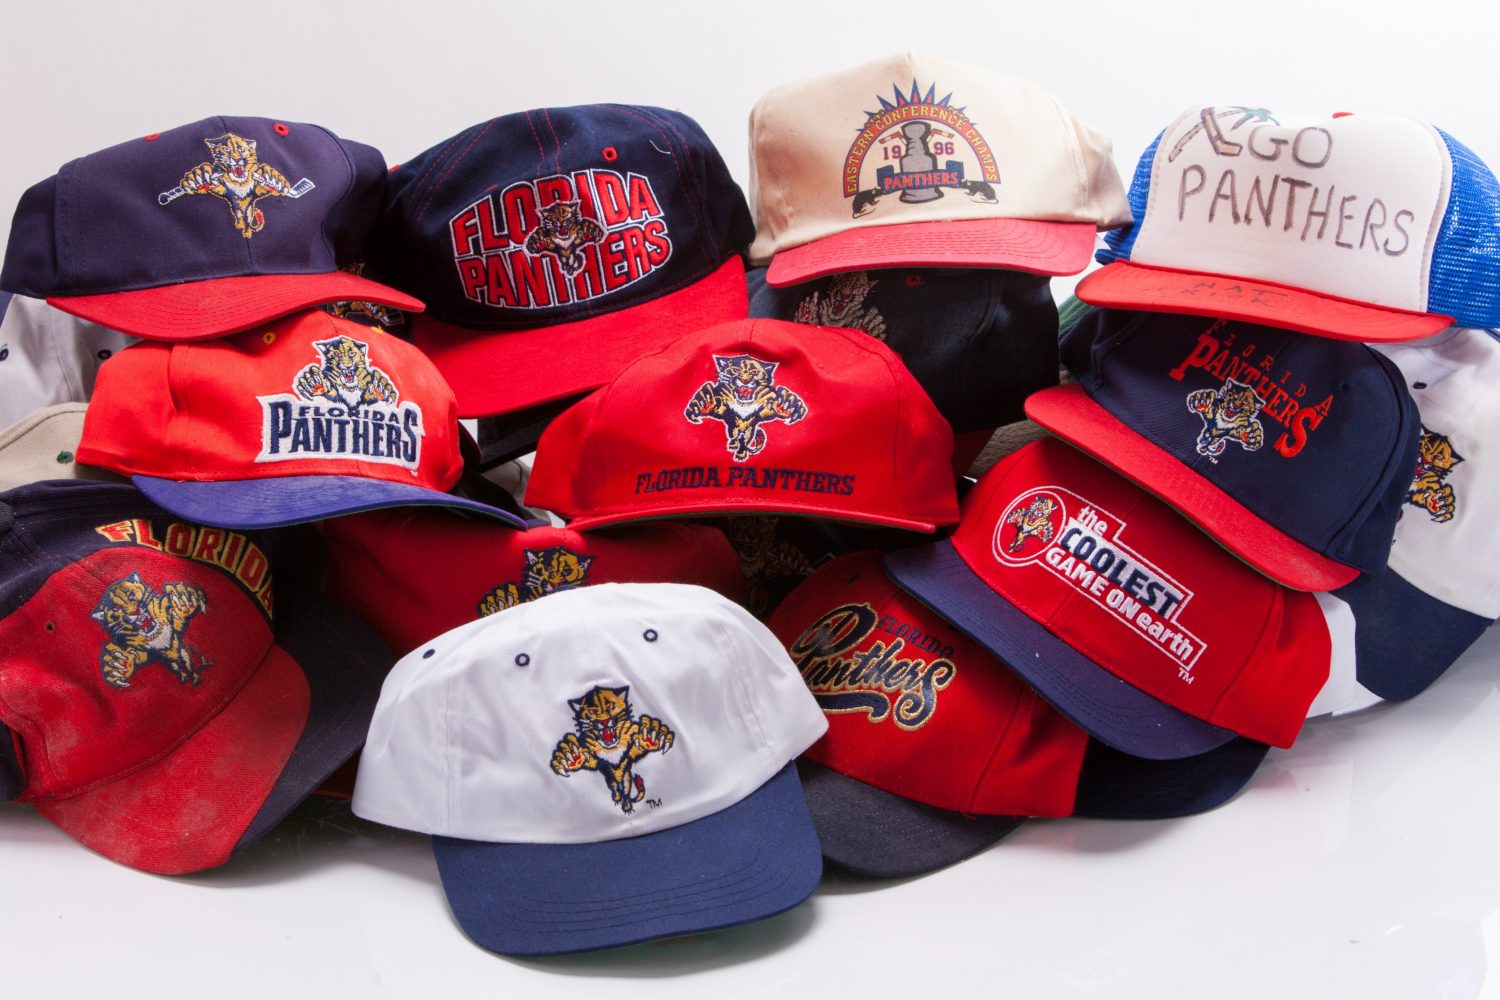 panthers hat apparel